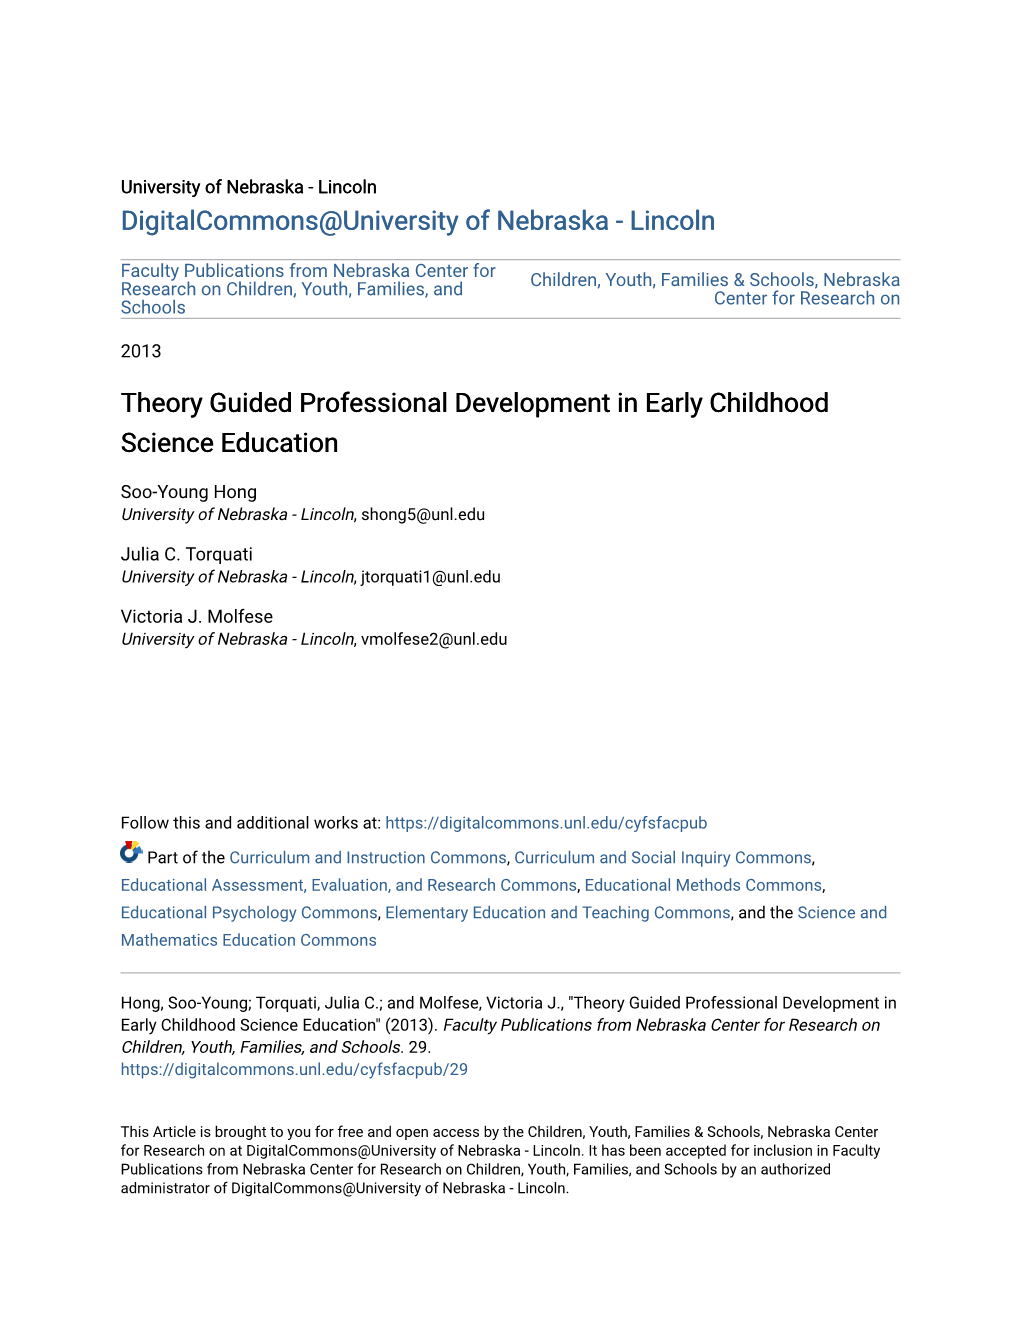 Theory Guided Professional Development in Early Childhood Science Education